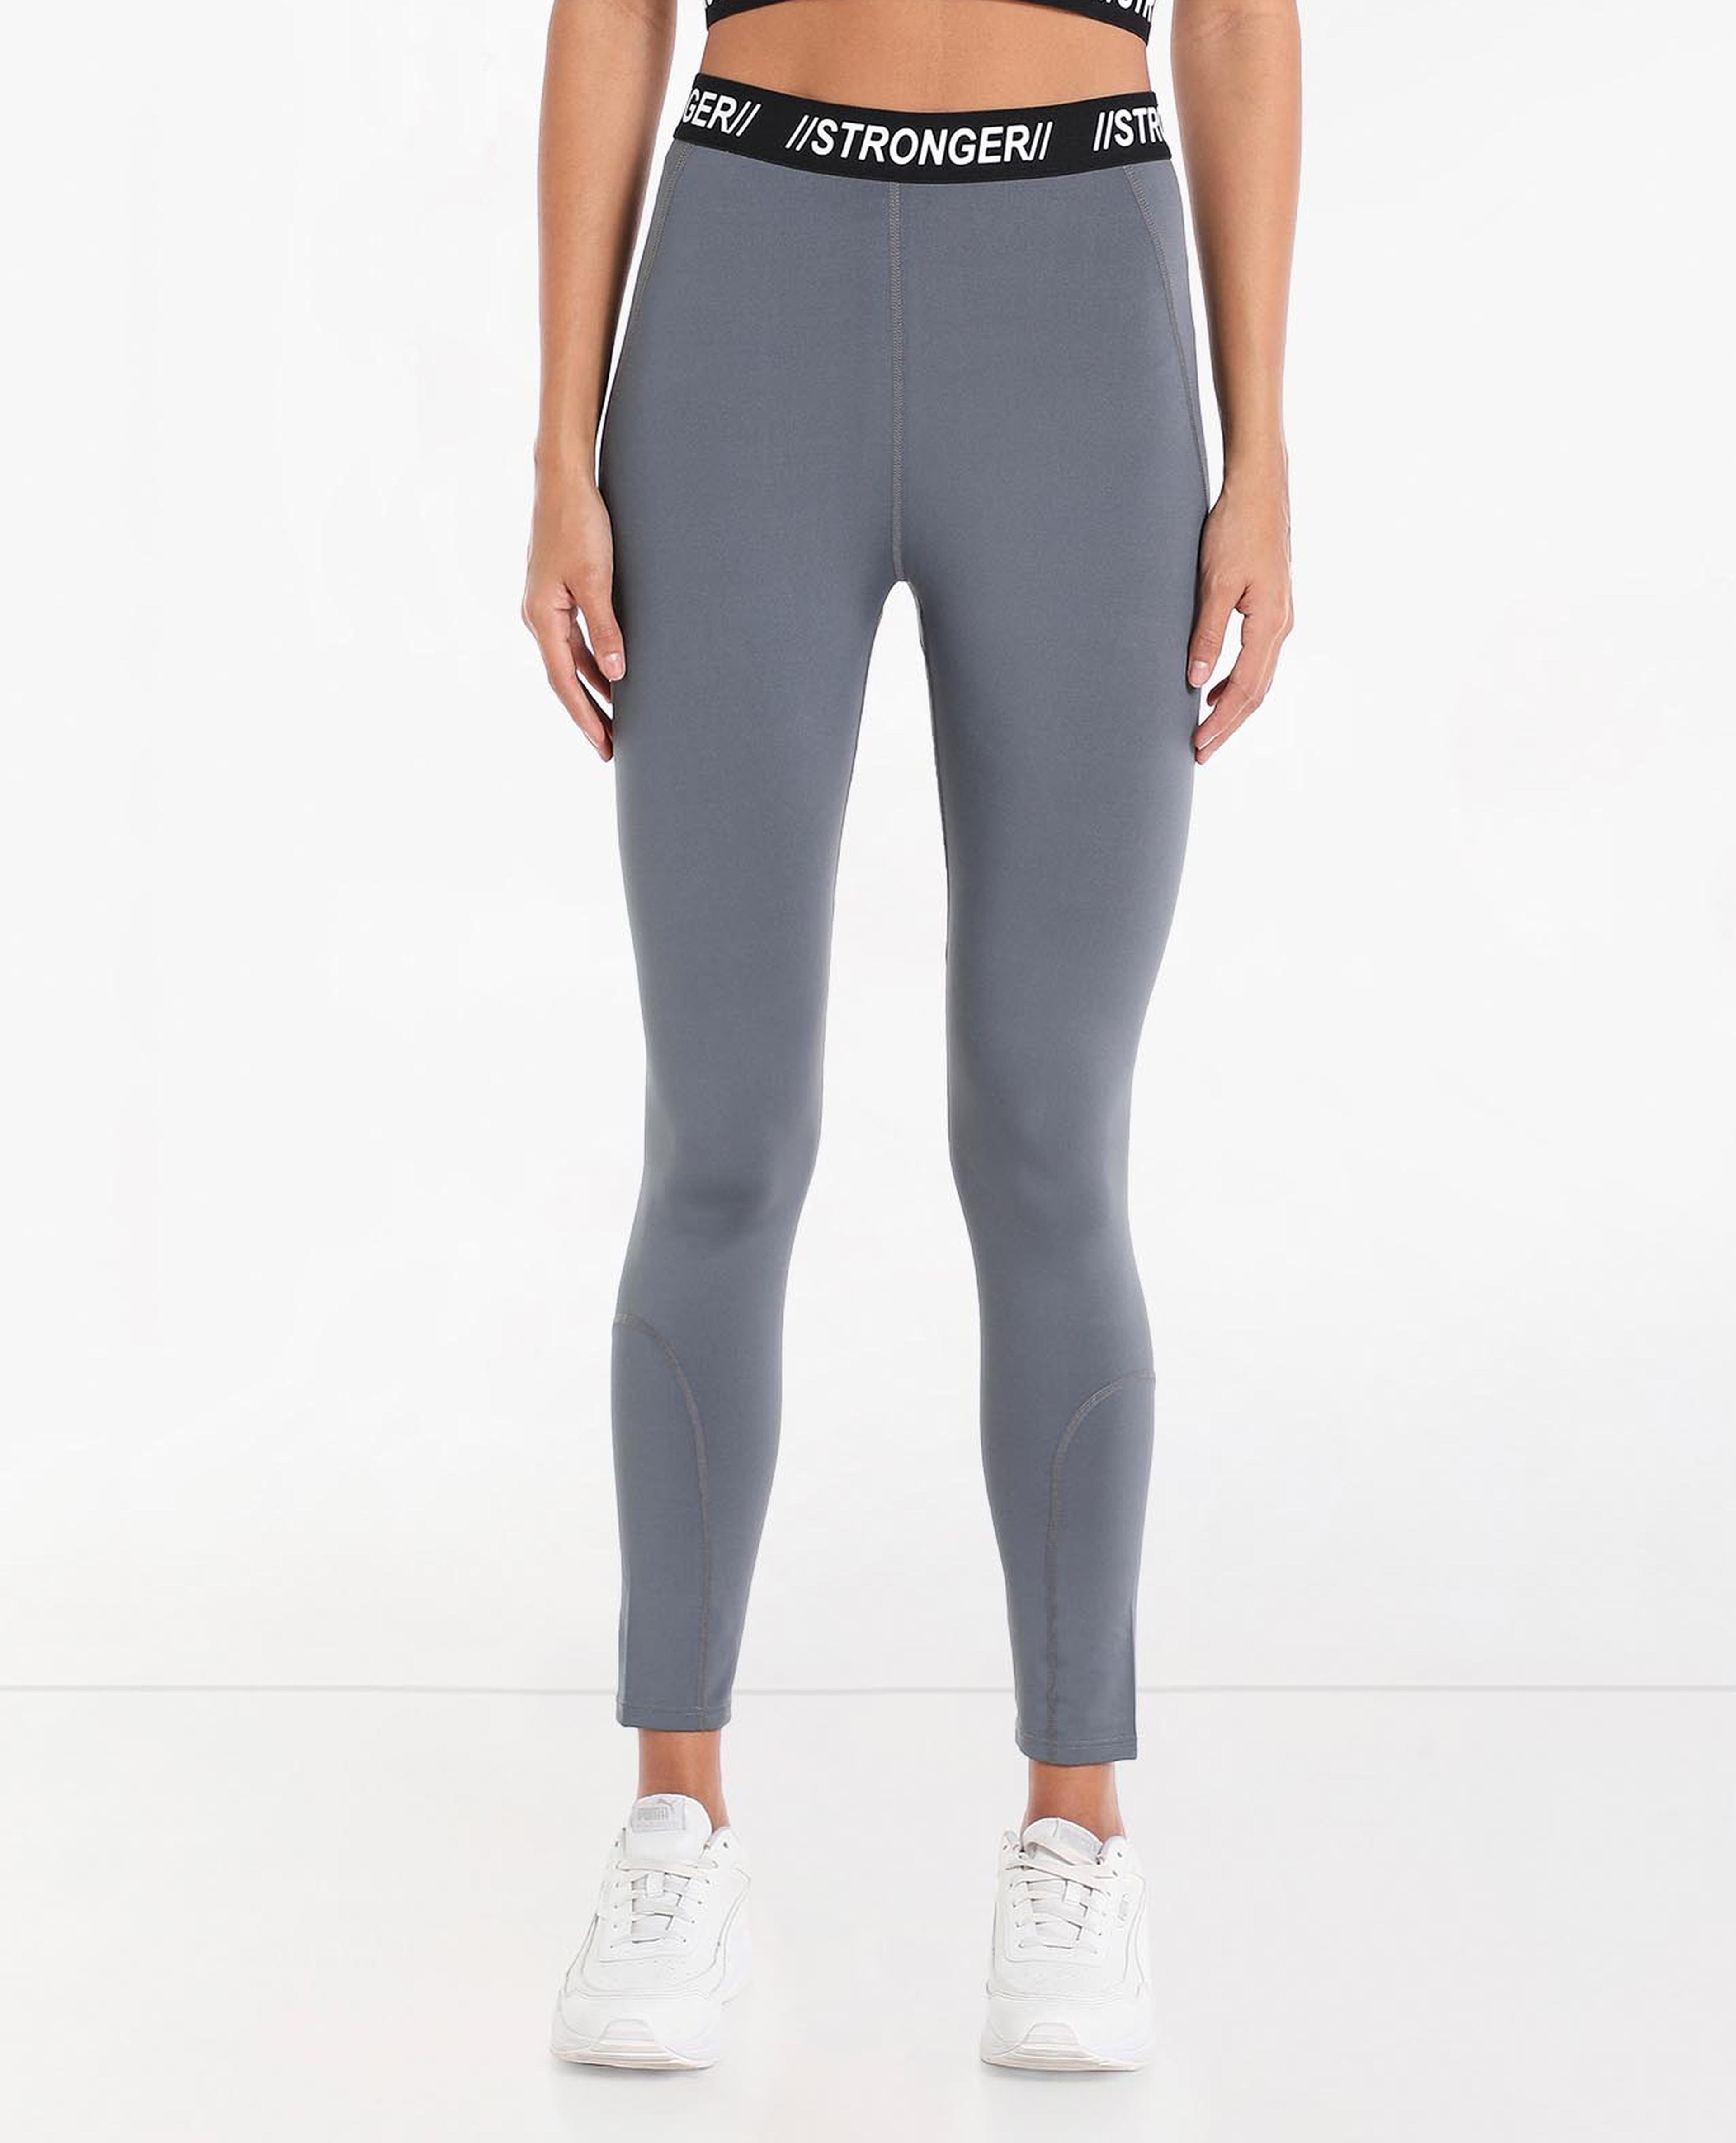 Solid Mid Waist Sports Leggings with Slip-On Closure